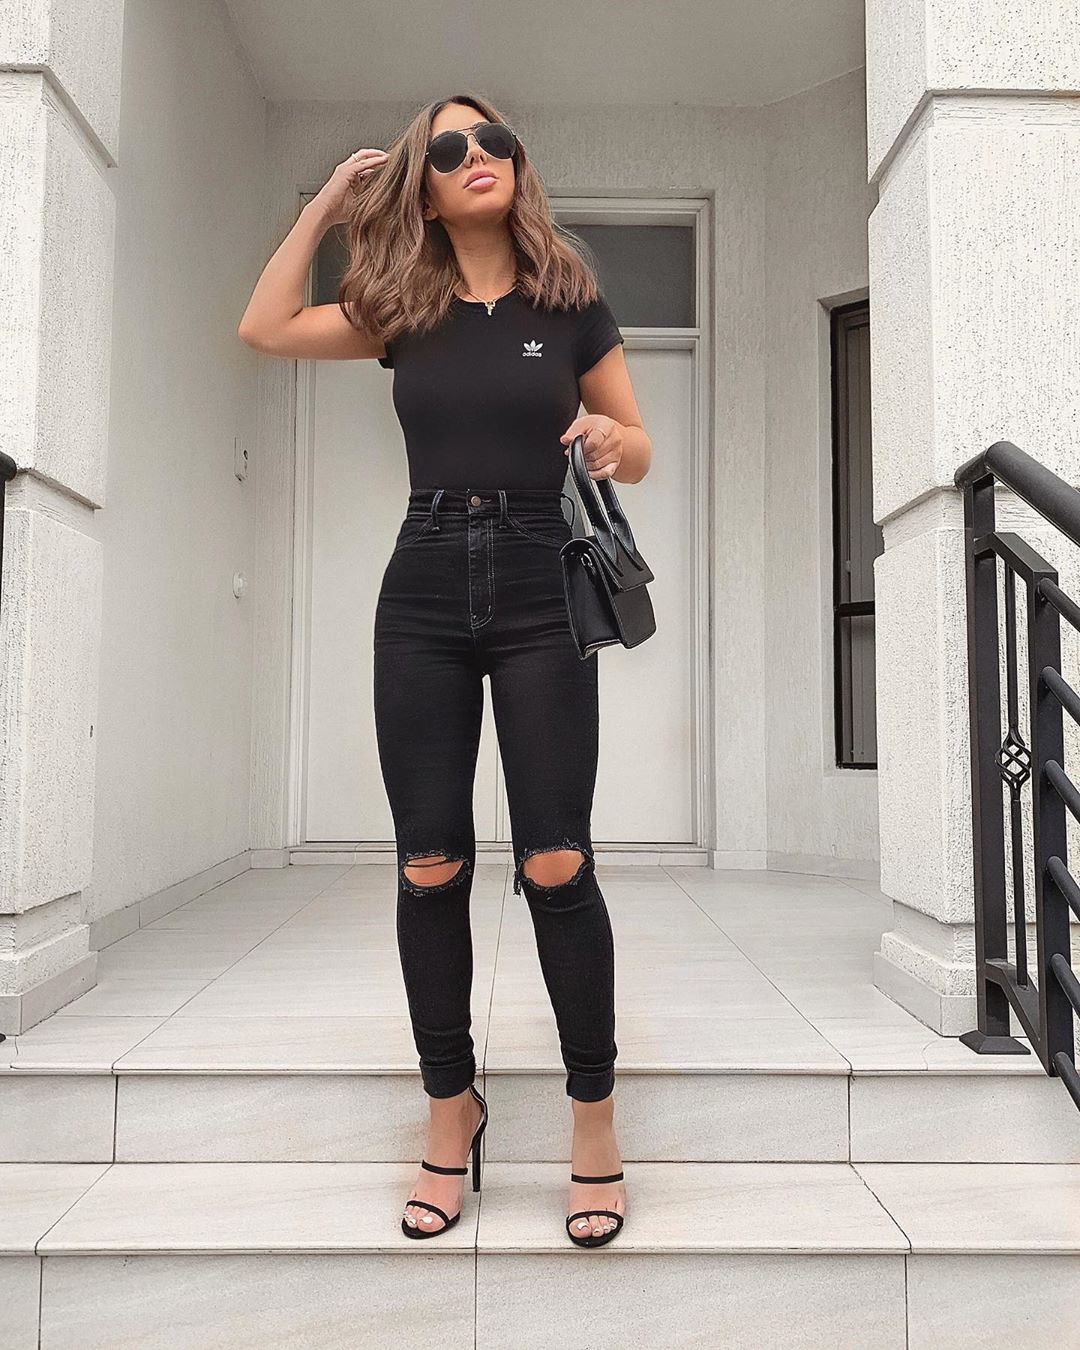 black outfits for women with leggings, outfit designs, footwear: Black Leggings  